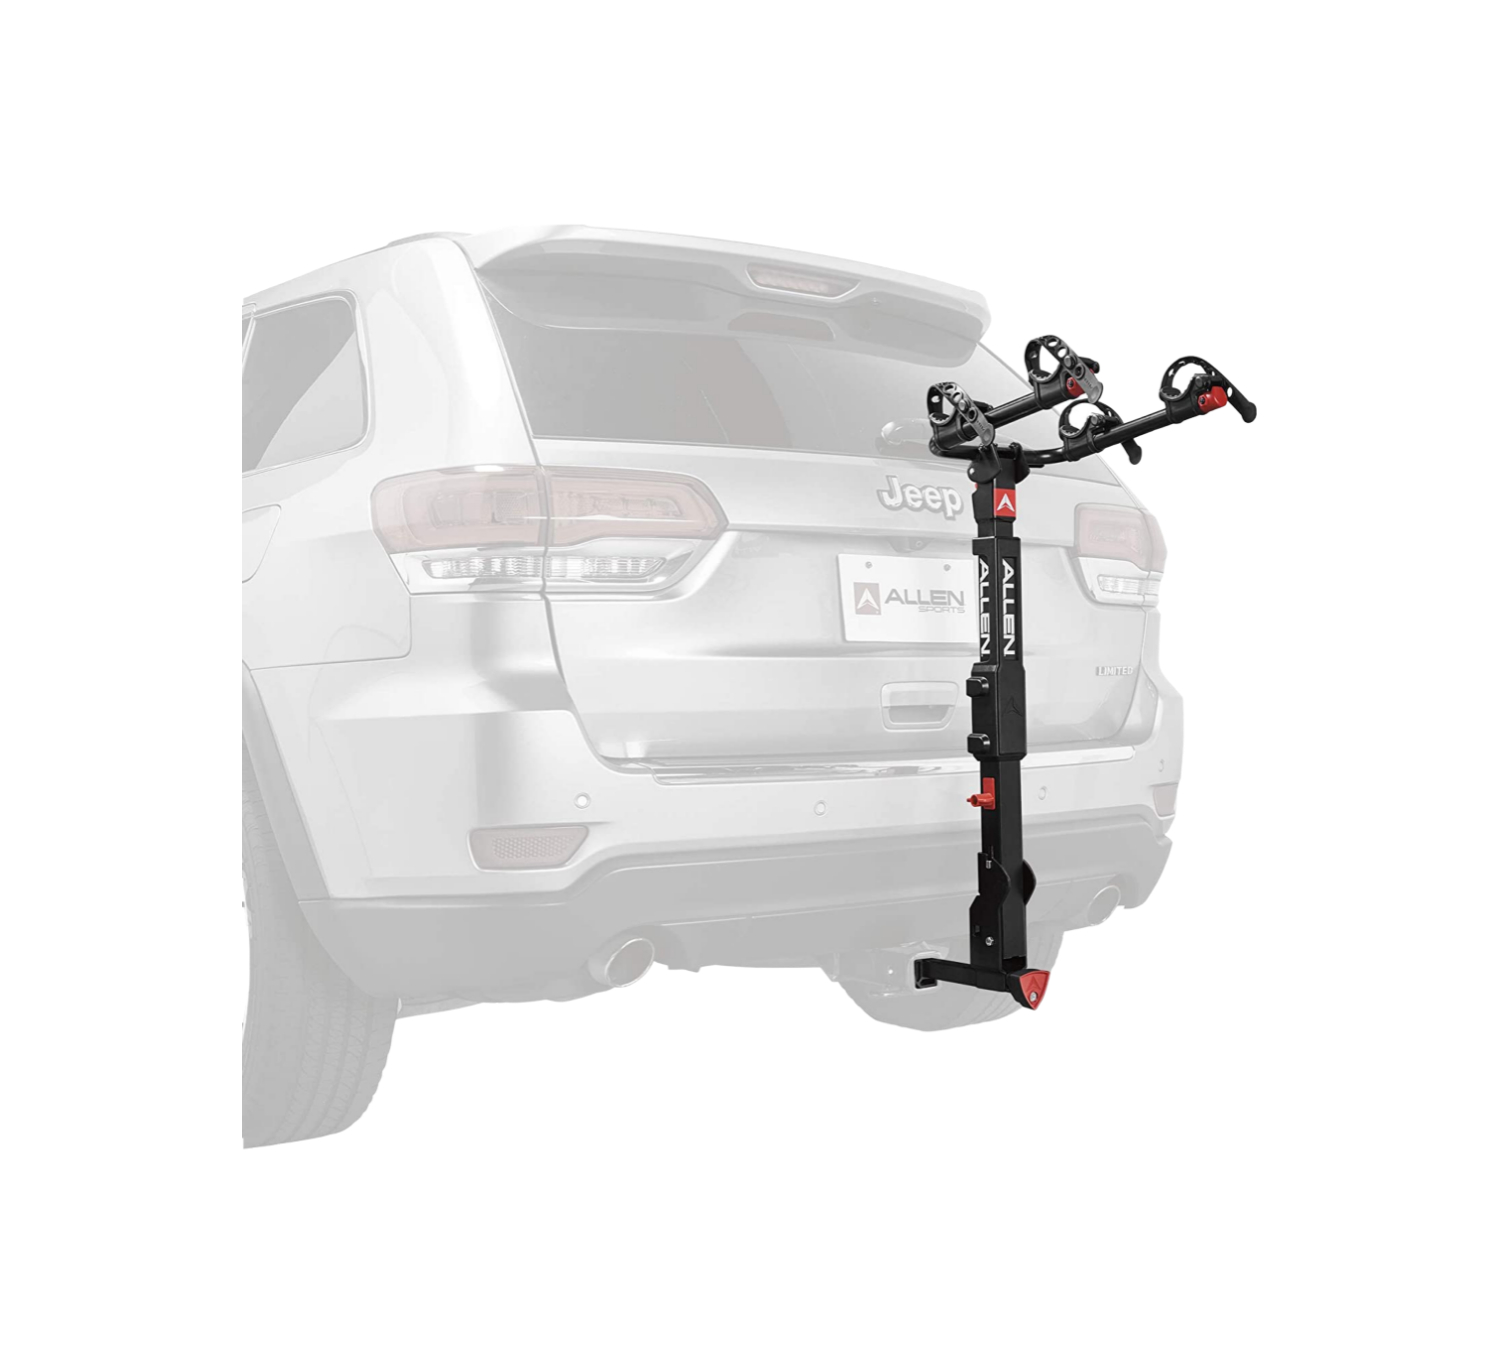 Allen Sports 2-Bike Hitch Racks for 1 1_4 in. and 2 in. Hitch